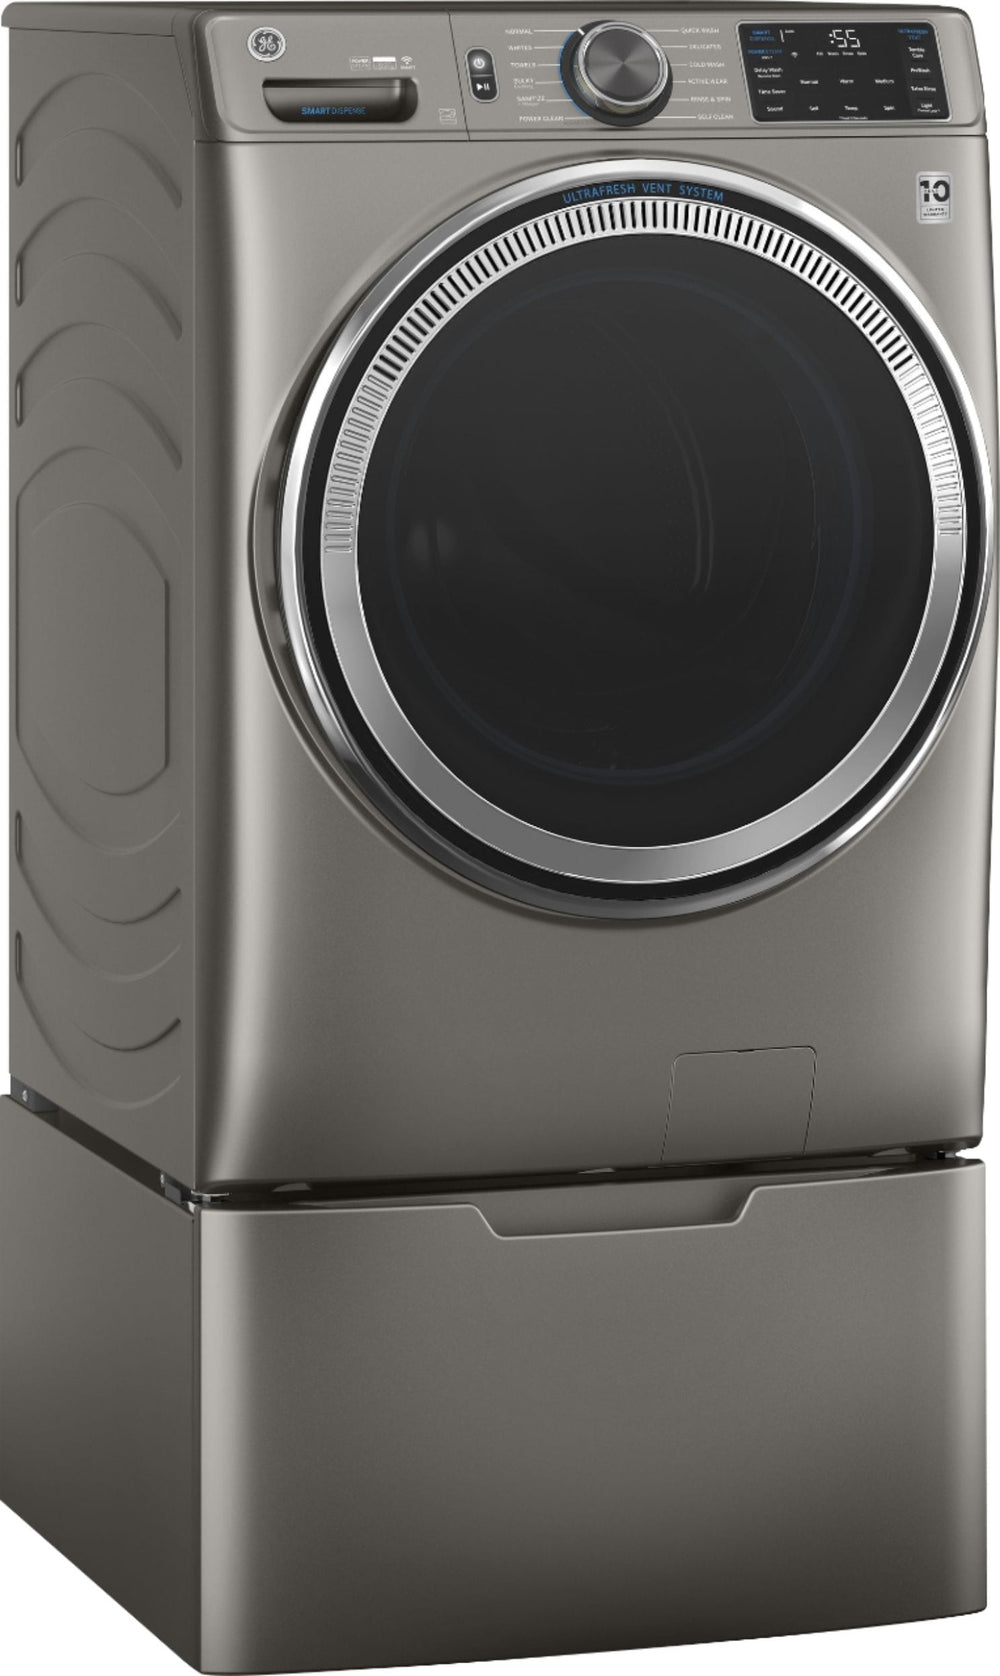 GE - 4.8 Cu Ft High-Efficiency Stackable Smart Front Load Washer w/UltraFresh Vent, Microban Antimicrobial & SmartDispense - Satin nickel_1